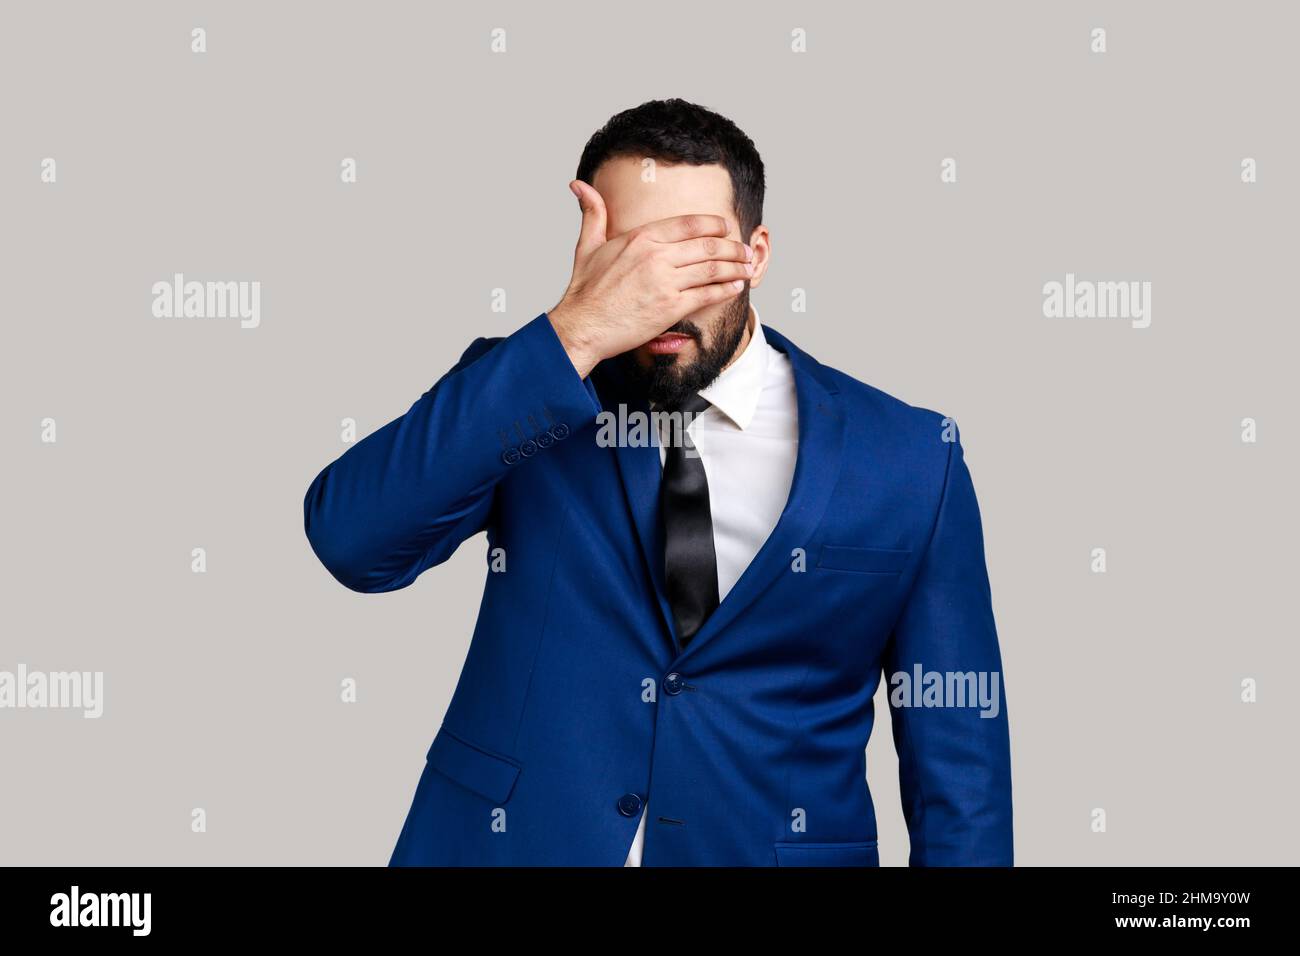 Bearded man closing eyes with hand, dont want to see that, ignoring problems, hiding from stressful situations, wearing official style suit. Indoor studio shot isolated on gray background. Stock Photo